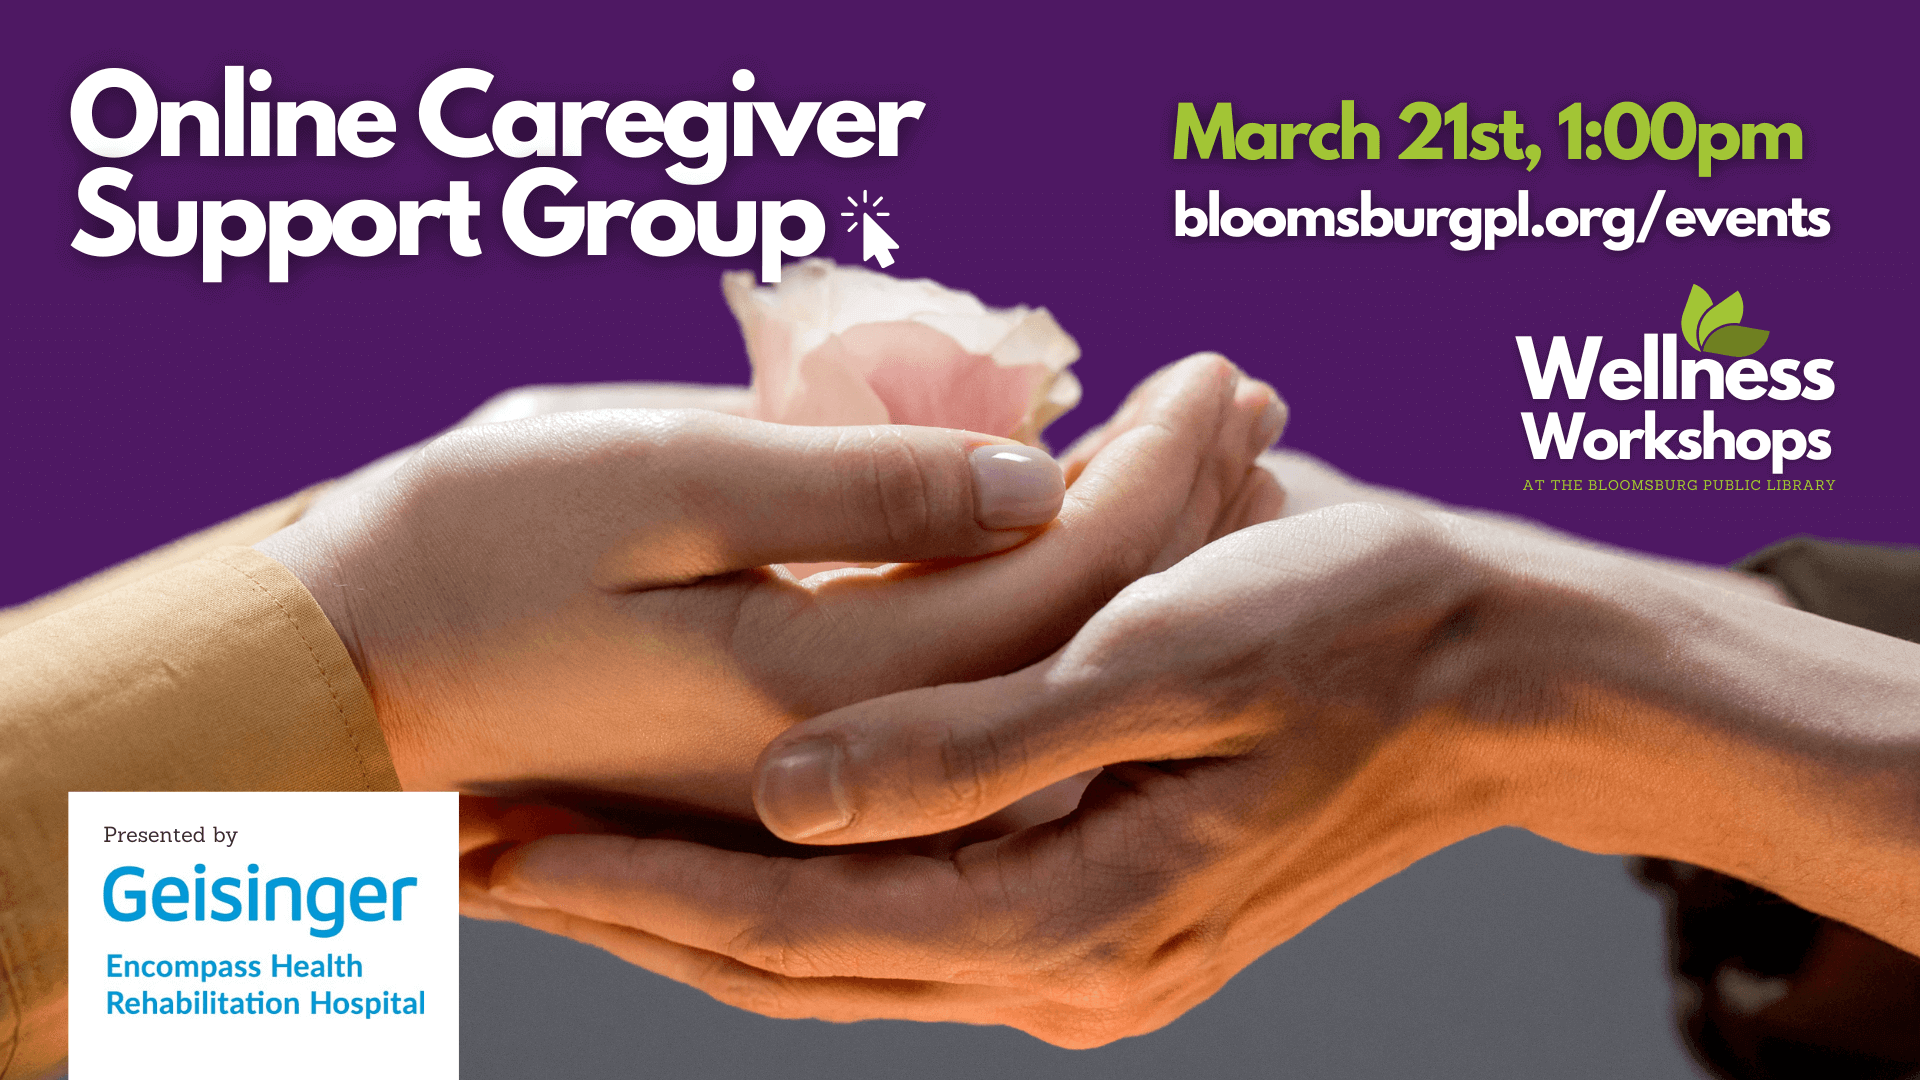 Online Caregiver Support Group - March 21 at 1pm - picture of cupped hands supporting each other